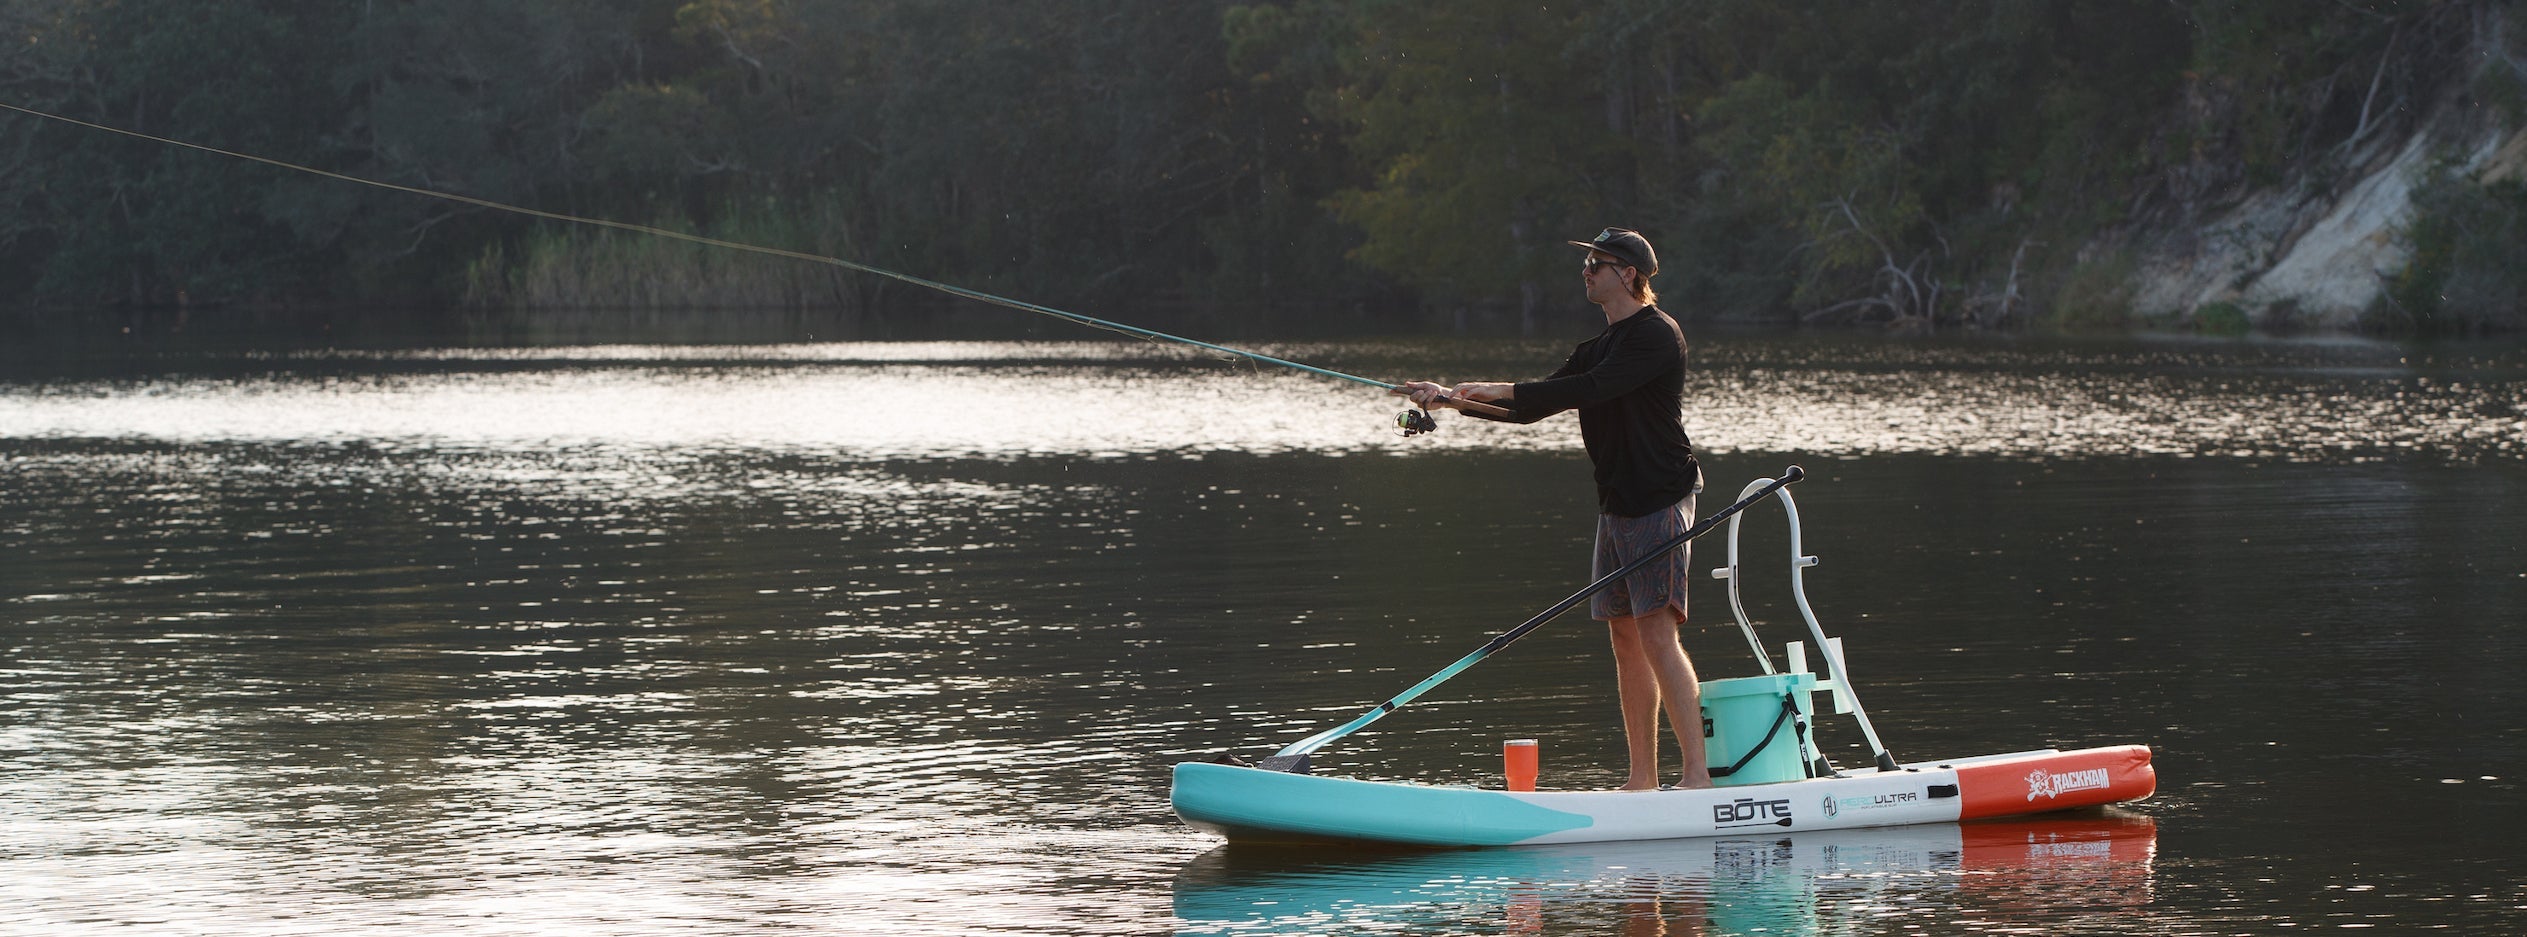 Inflatable Fishing Paddle Boards (iSUP)